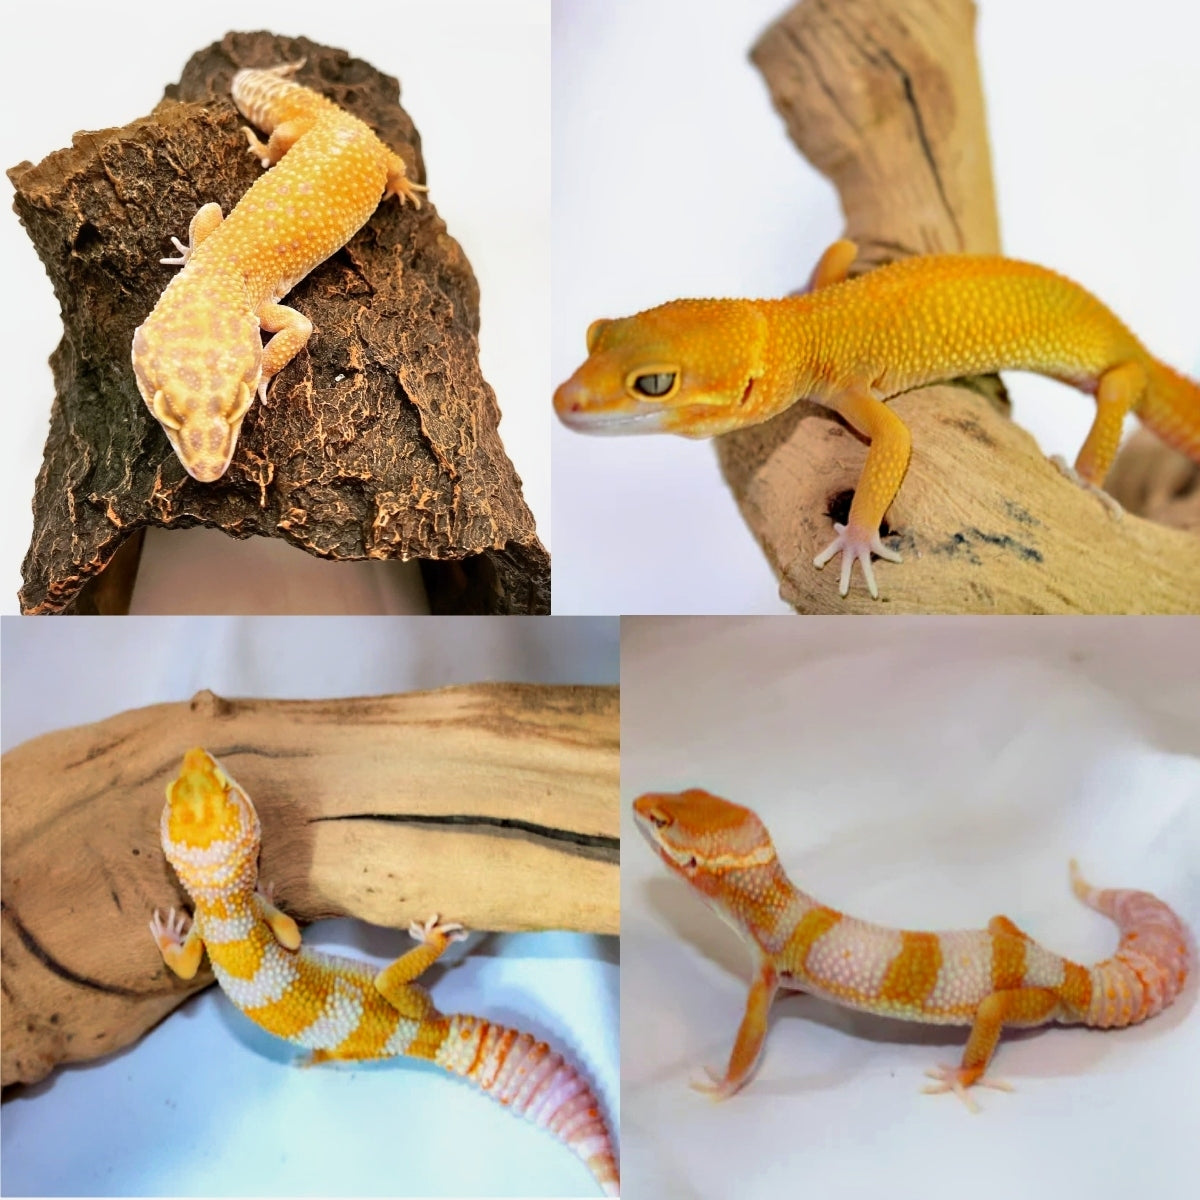 How to Tell If Your Gecko Is Male or Female